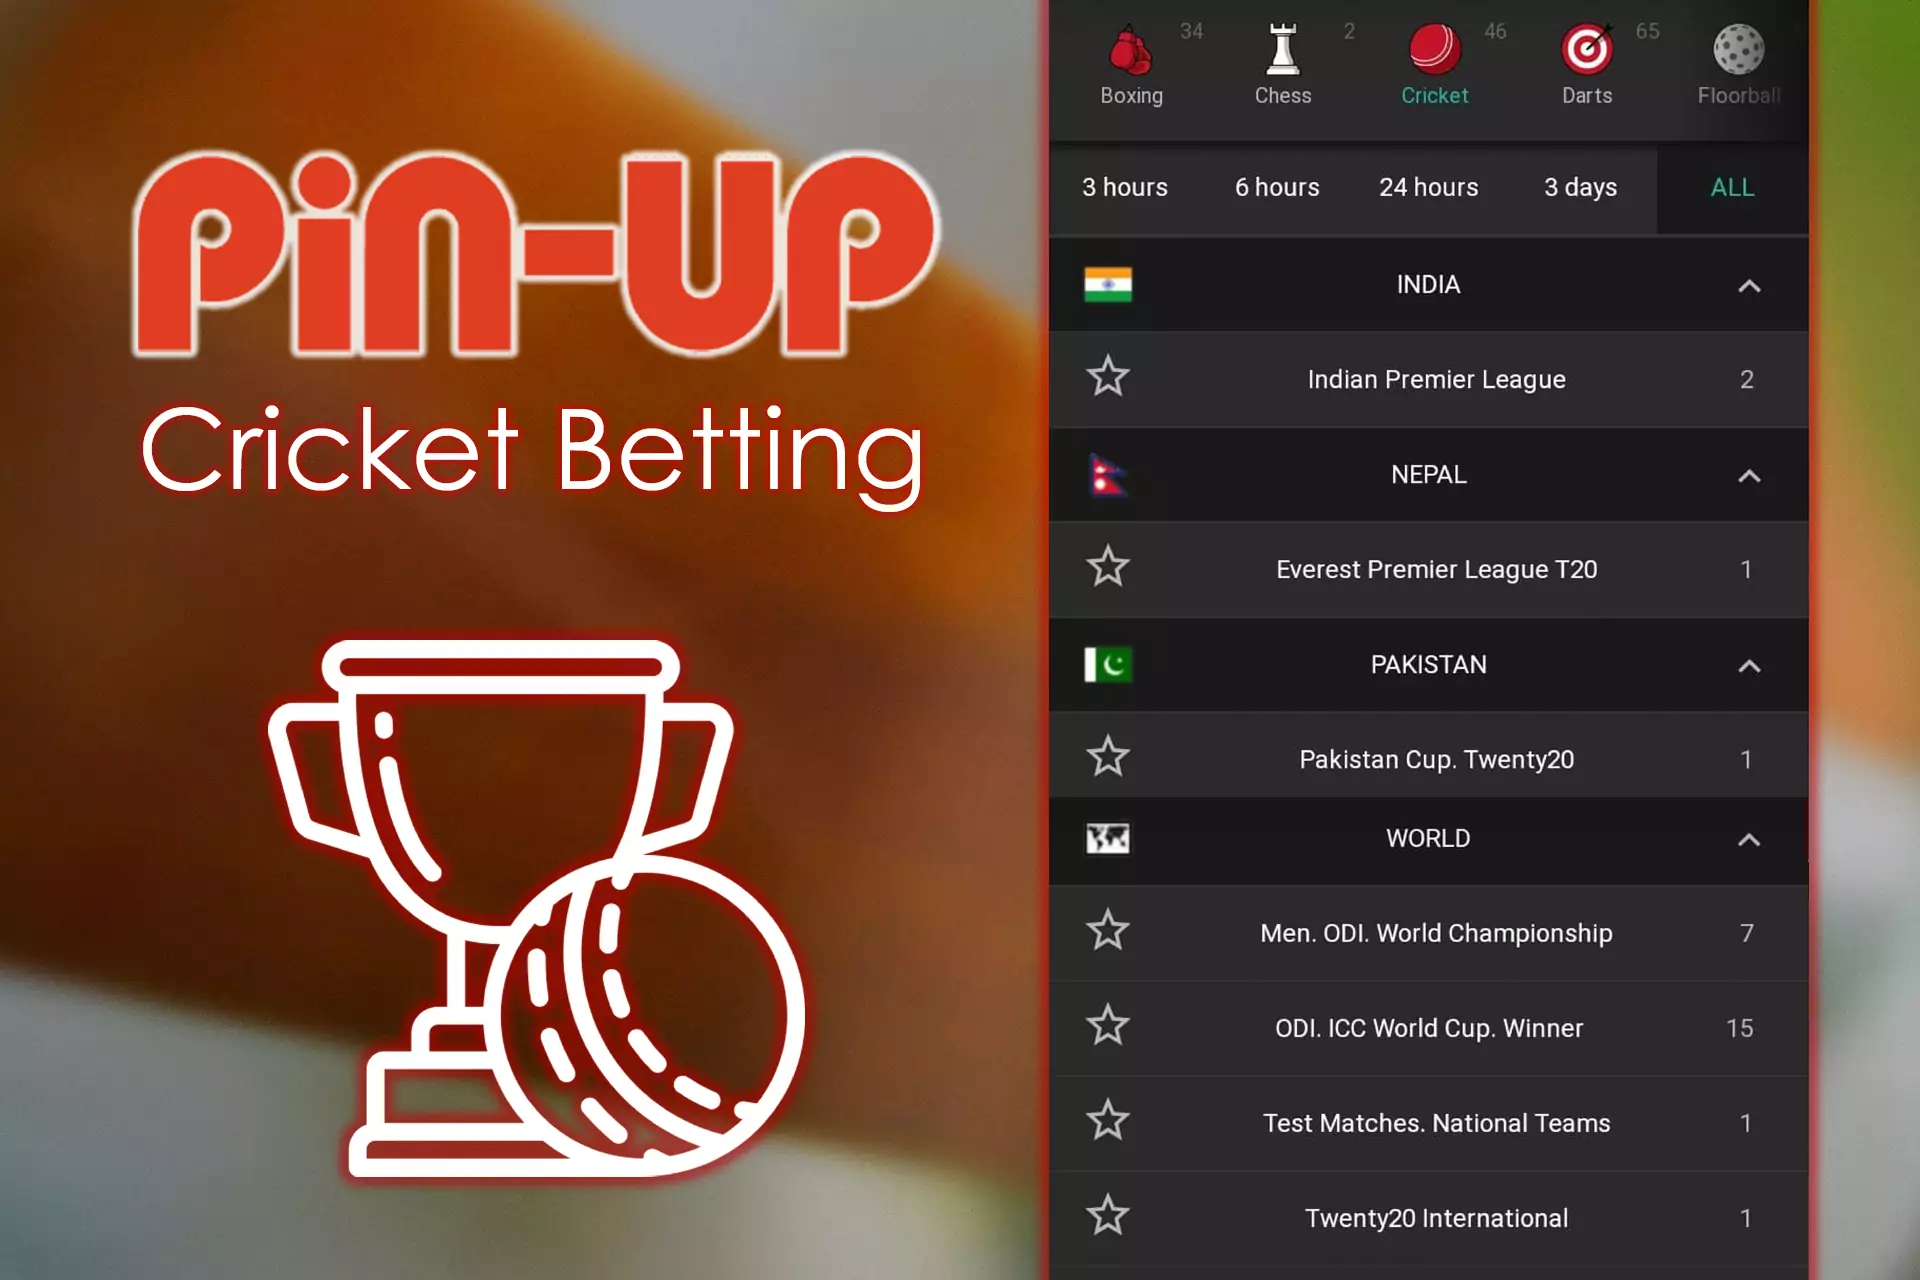 The cricket section is also available for betting in the Pin-Up app.